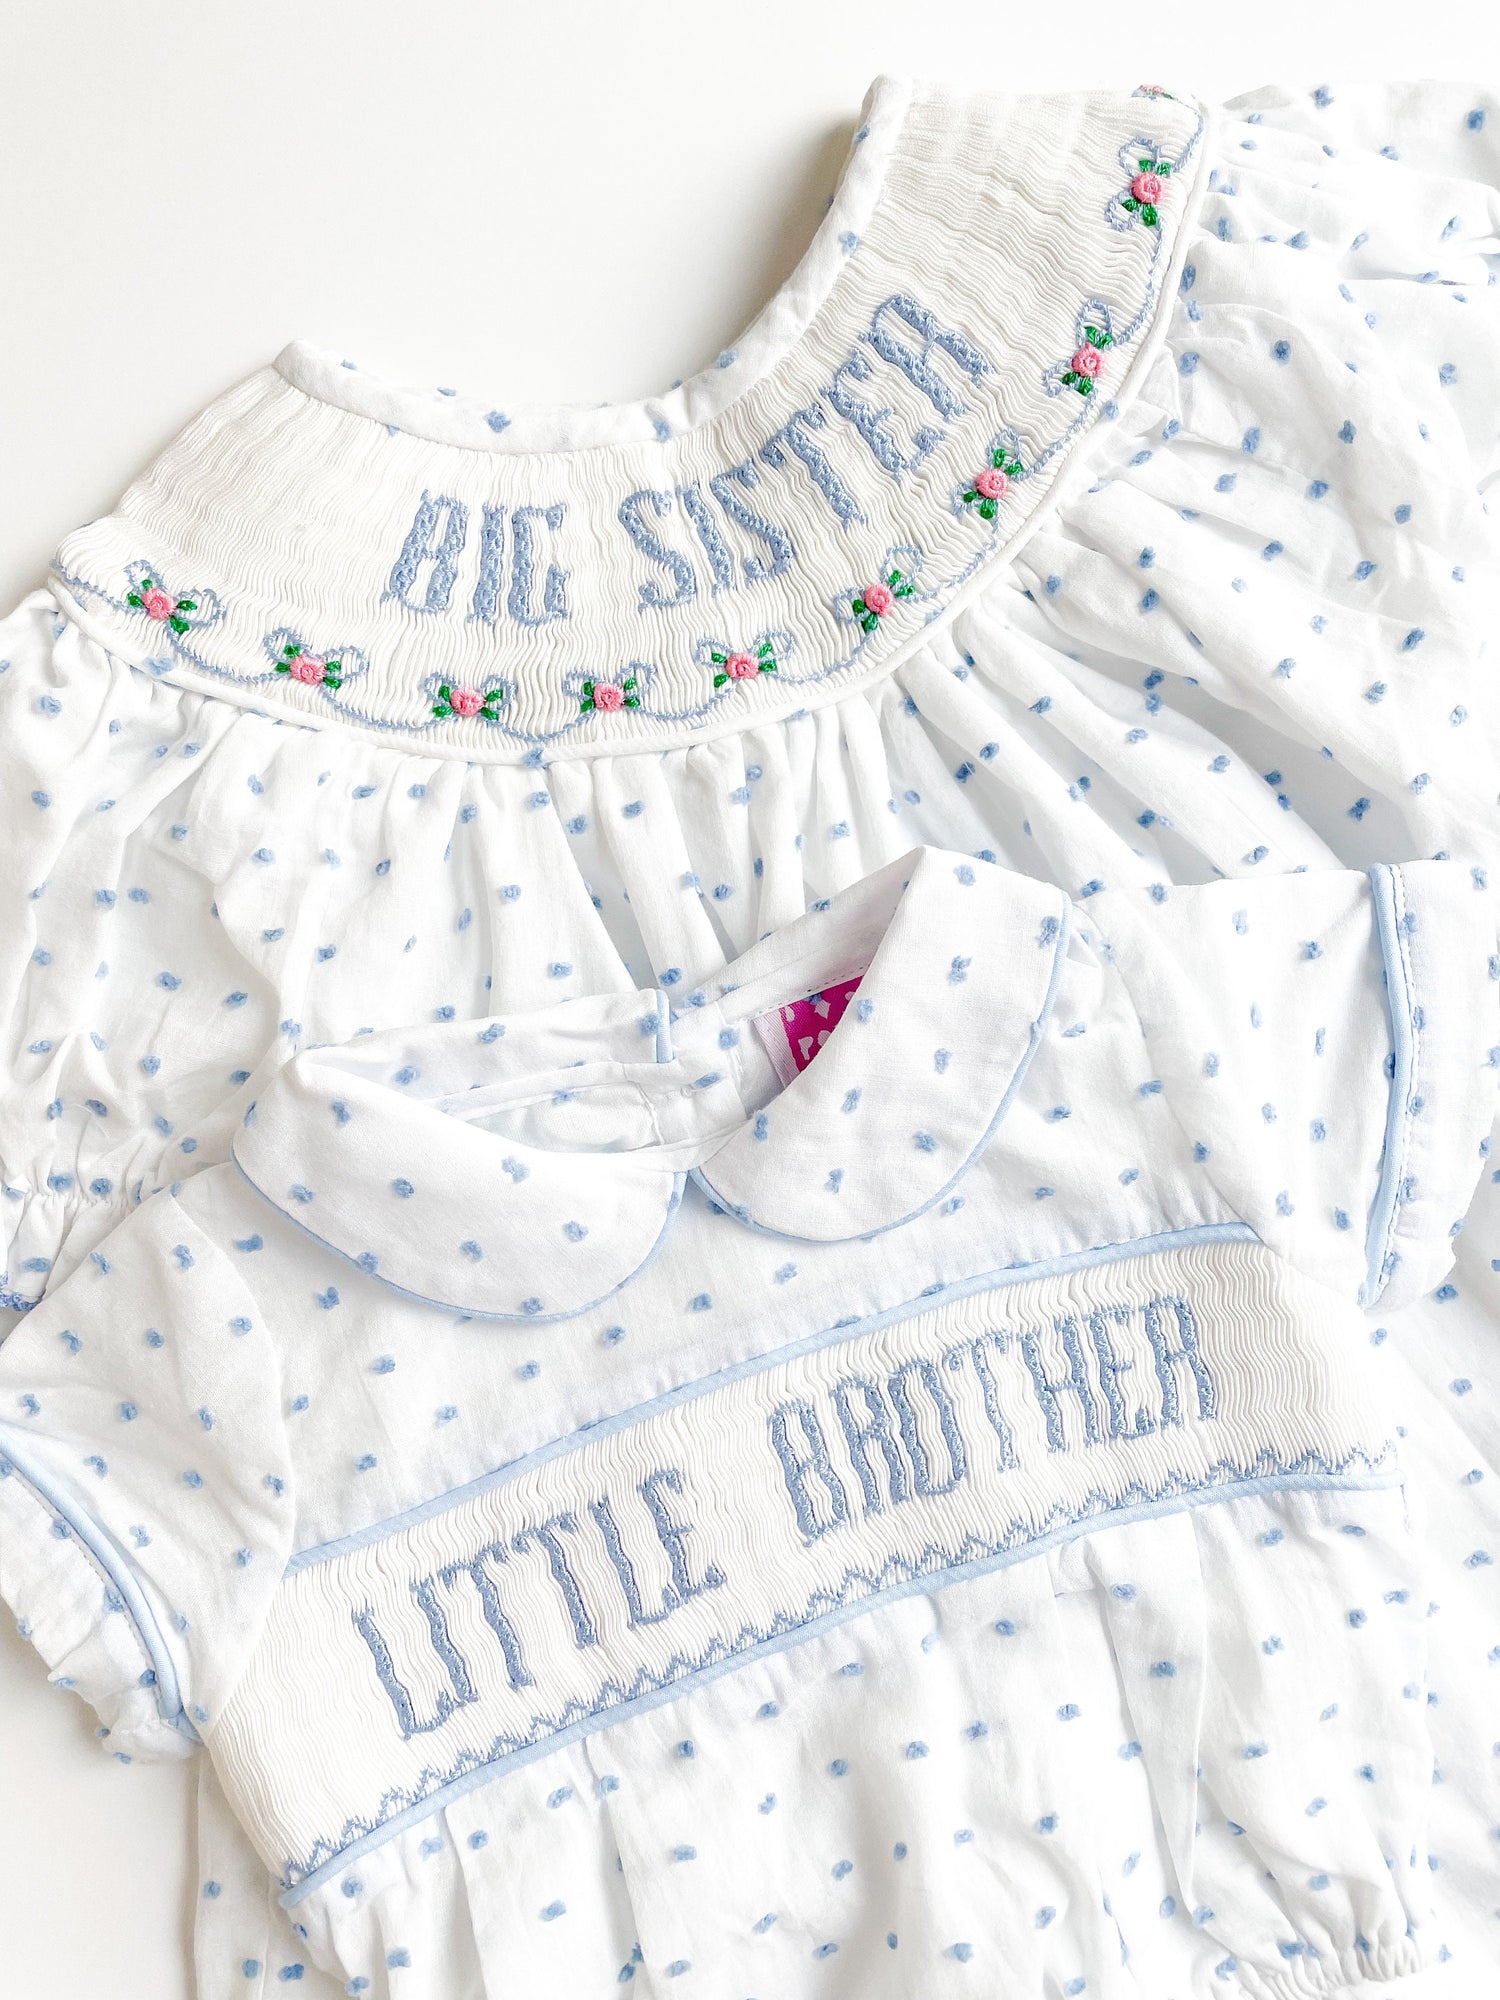 Big sister and little brother smocked outfits